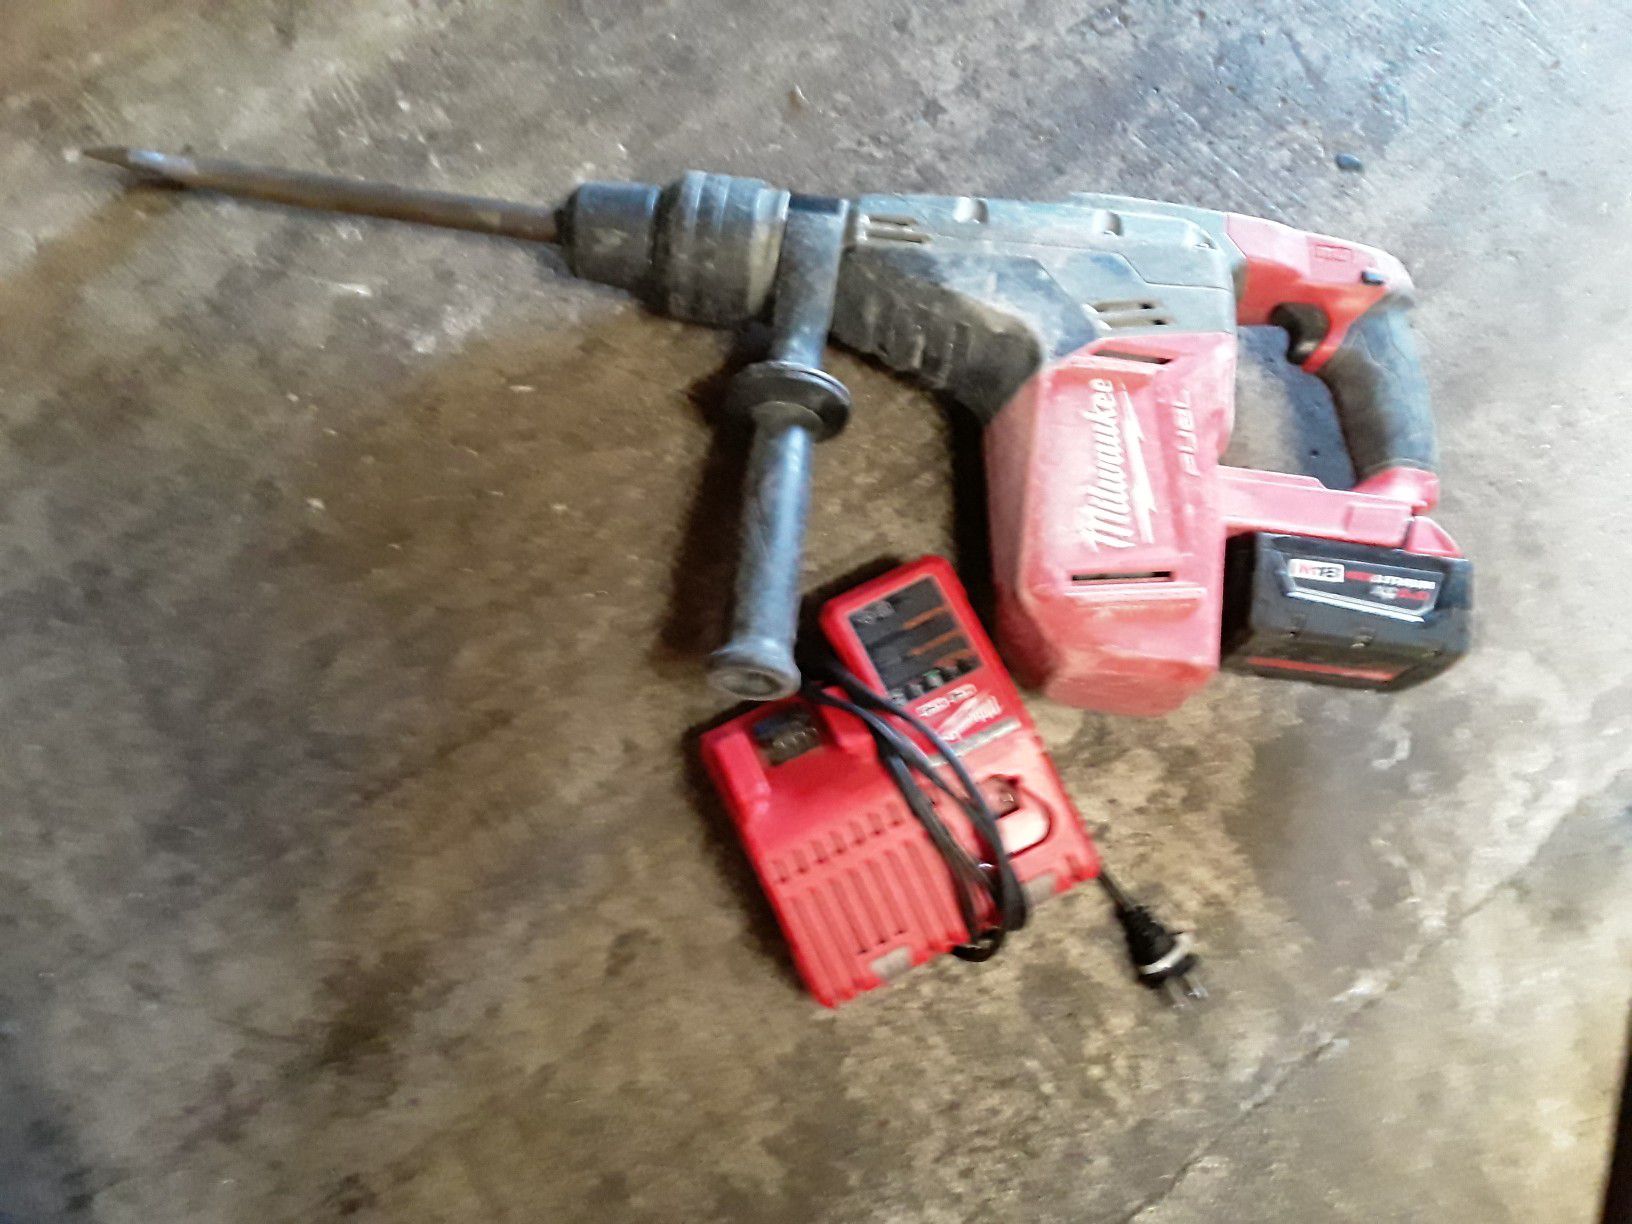 Jack hammer drill for sale works good price firm no low ballers please